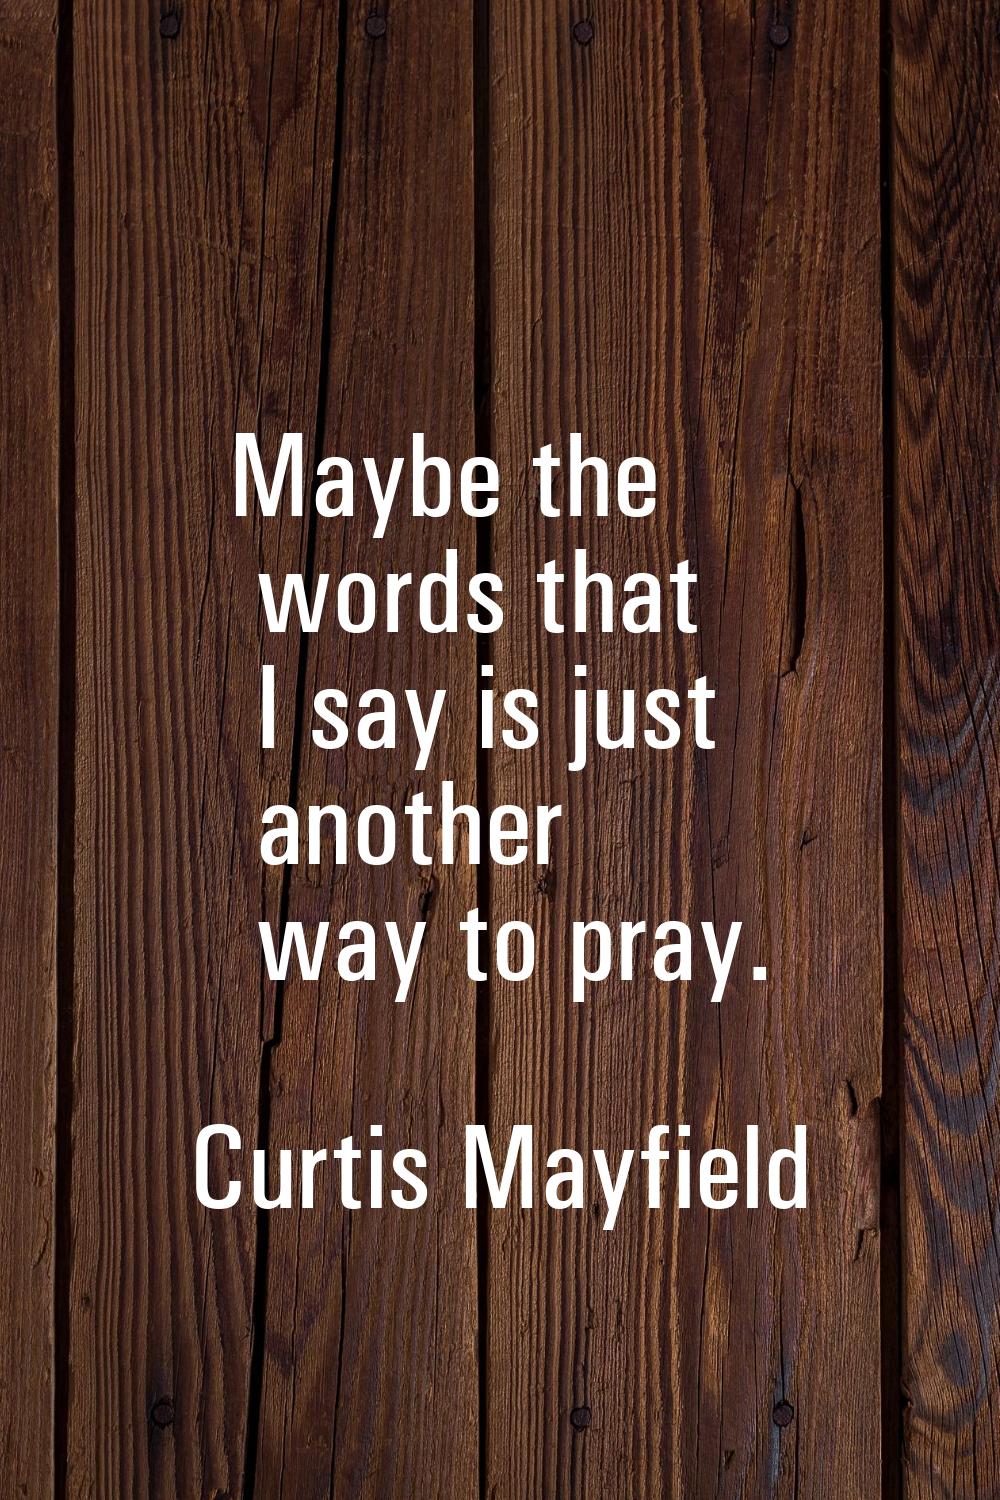 Maybe the words that I say is just another way to pray.